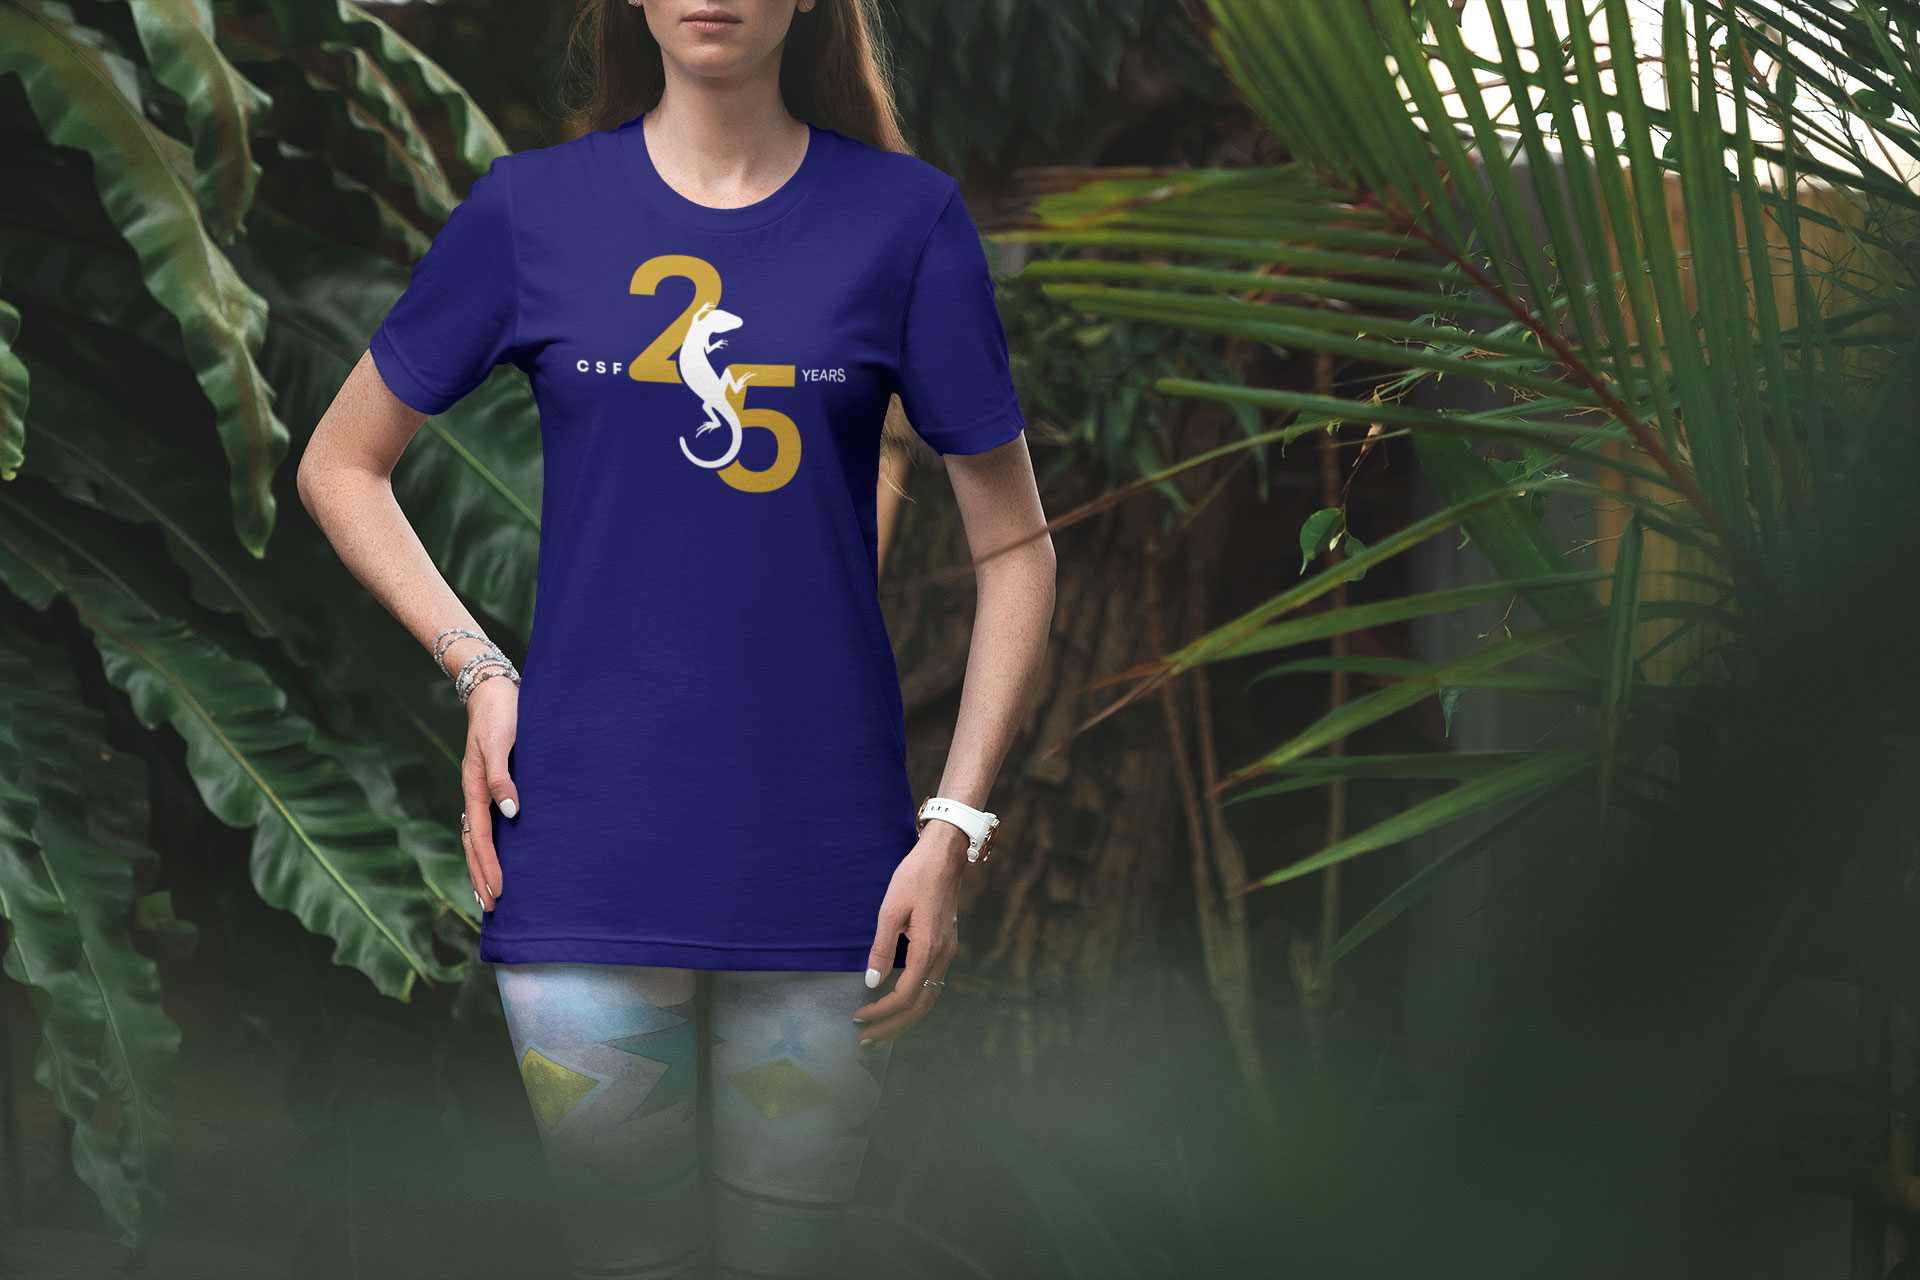 t-shirt-mockup-of-a-woman-surrounded-by-nature-3343-el1